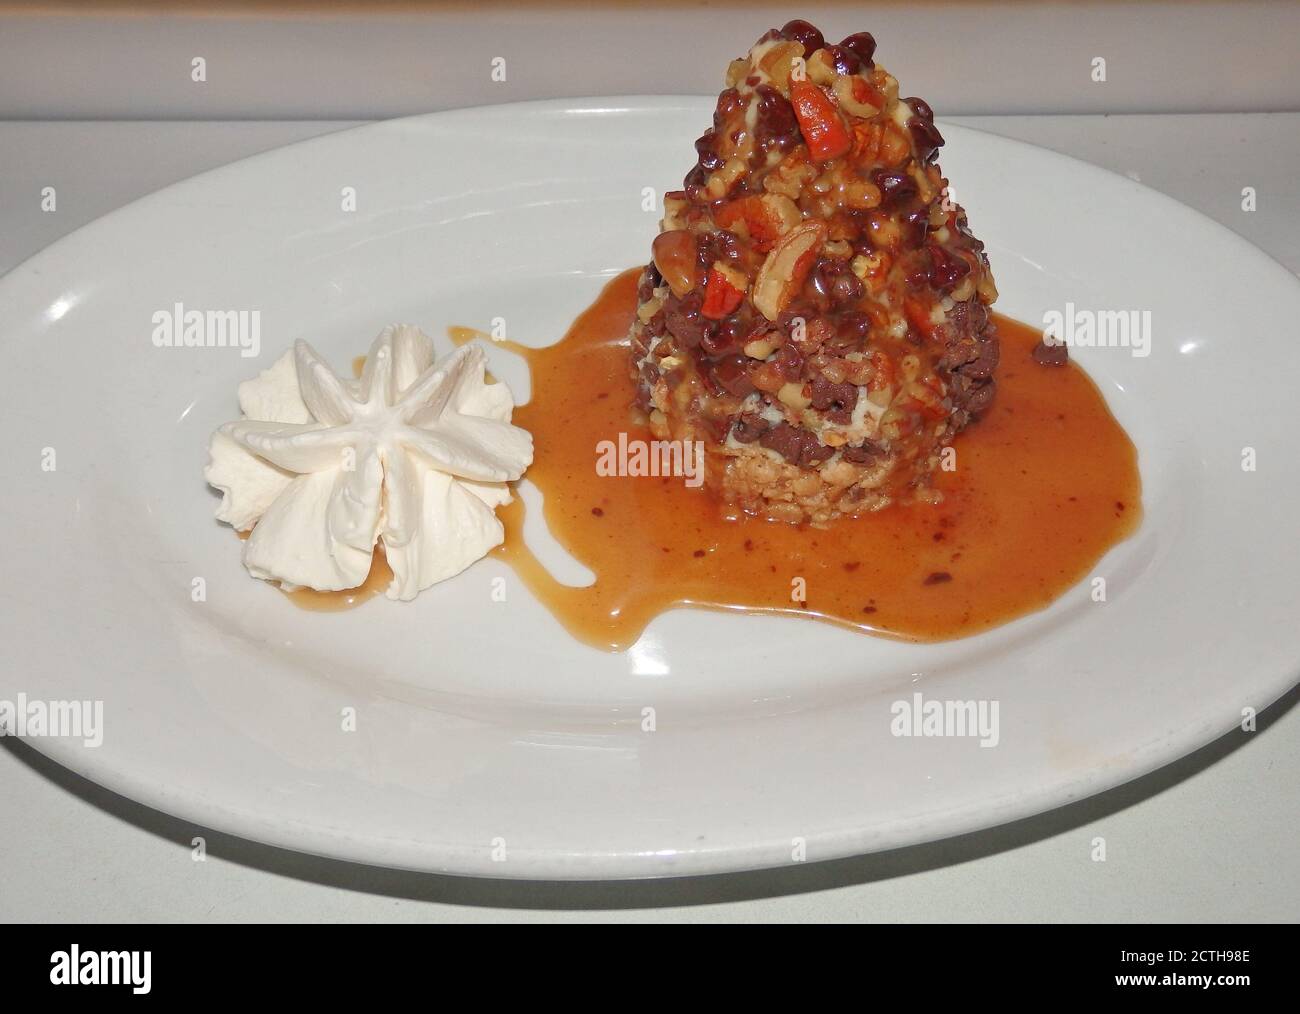 A nut and chocolate stack dessert with a little whipped cream.. Stock Photo